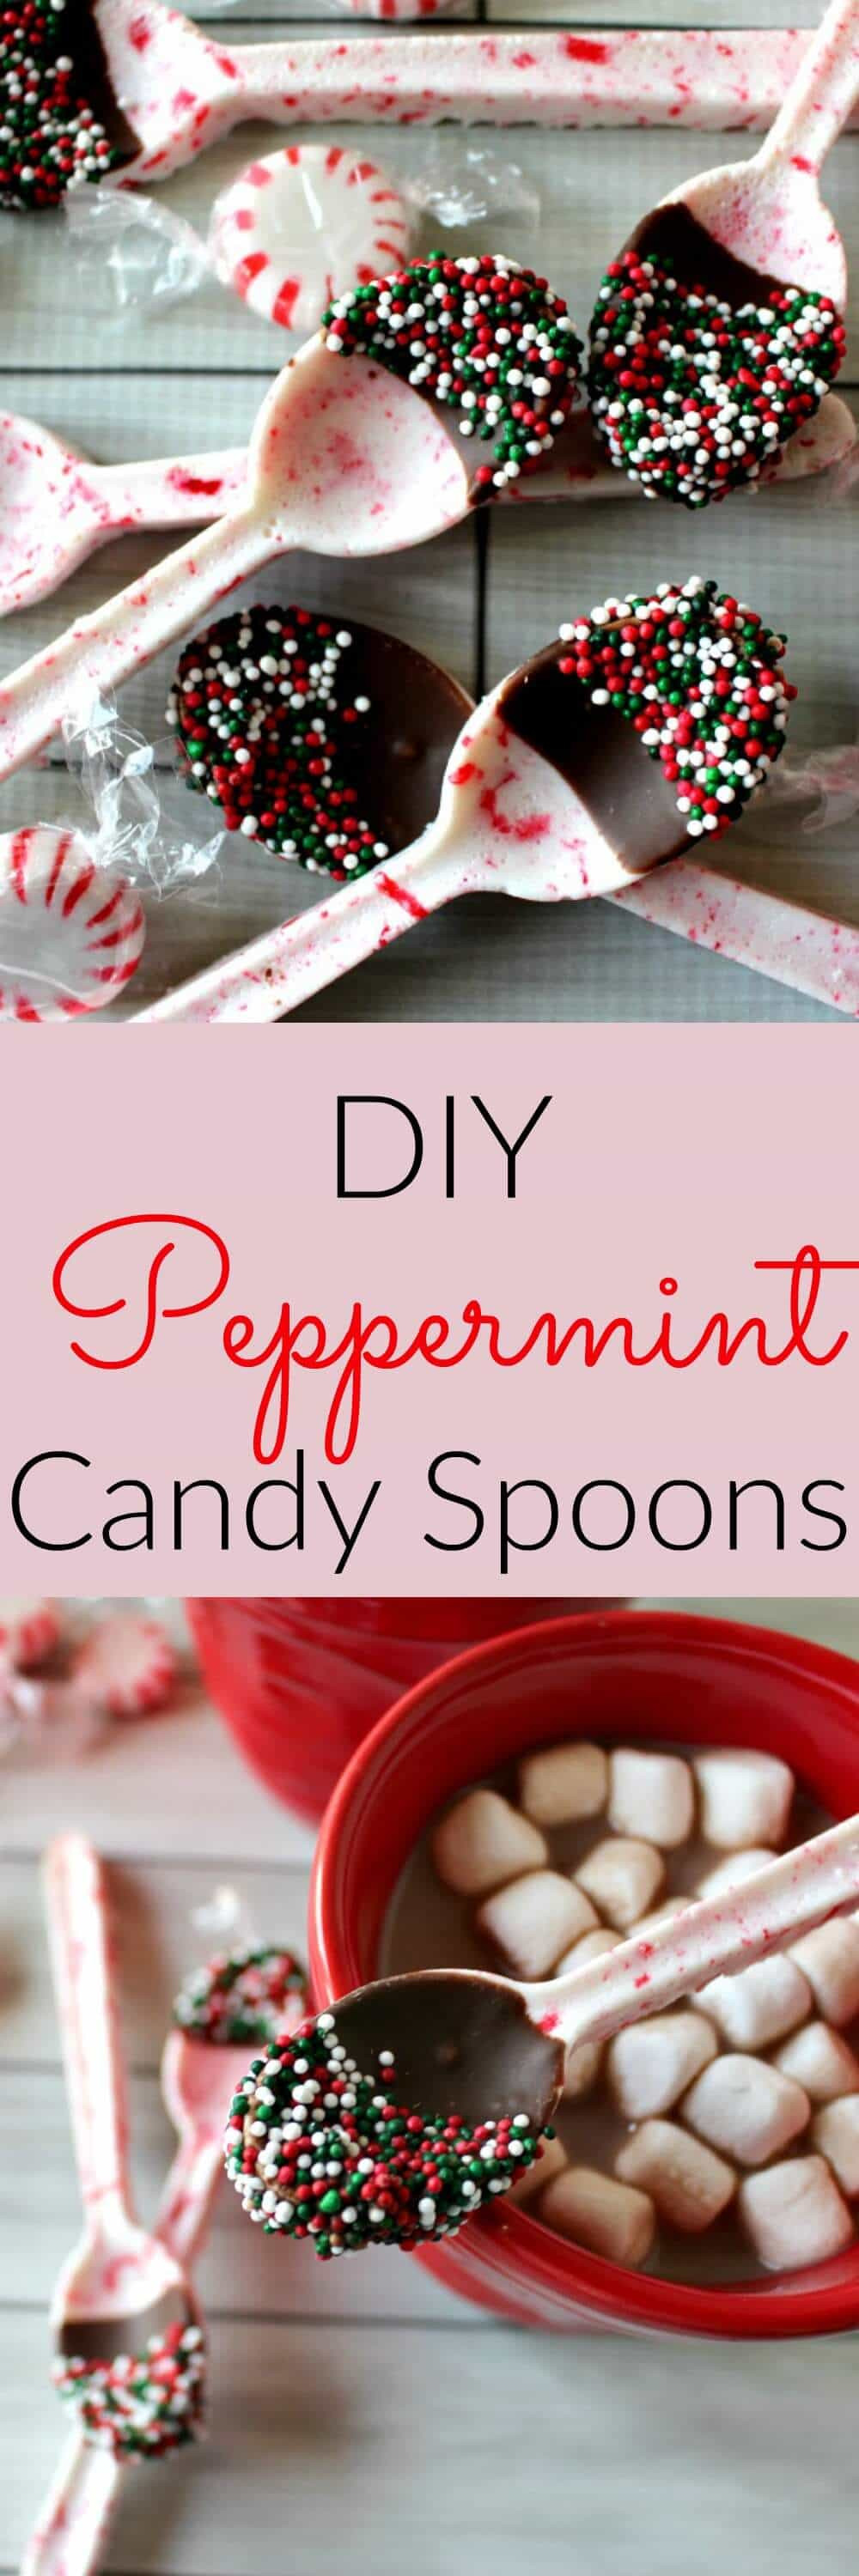 Cute Christmas Candy Ideas
 DIY Peppermint Candy Spoons Princess Pinky Girl